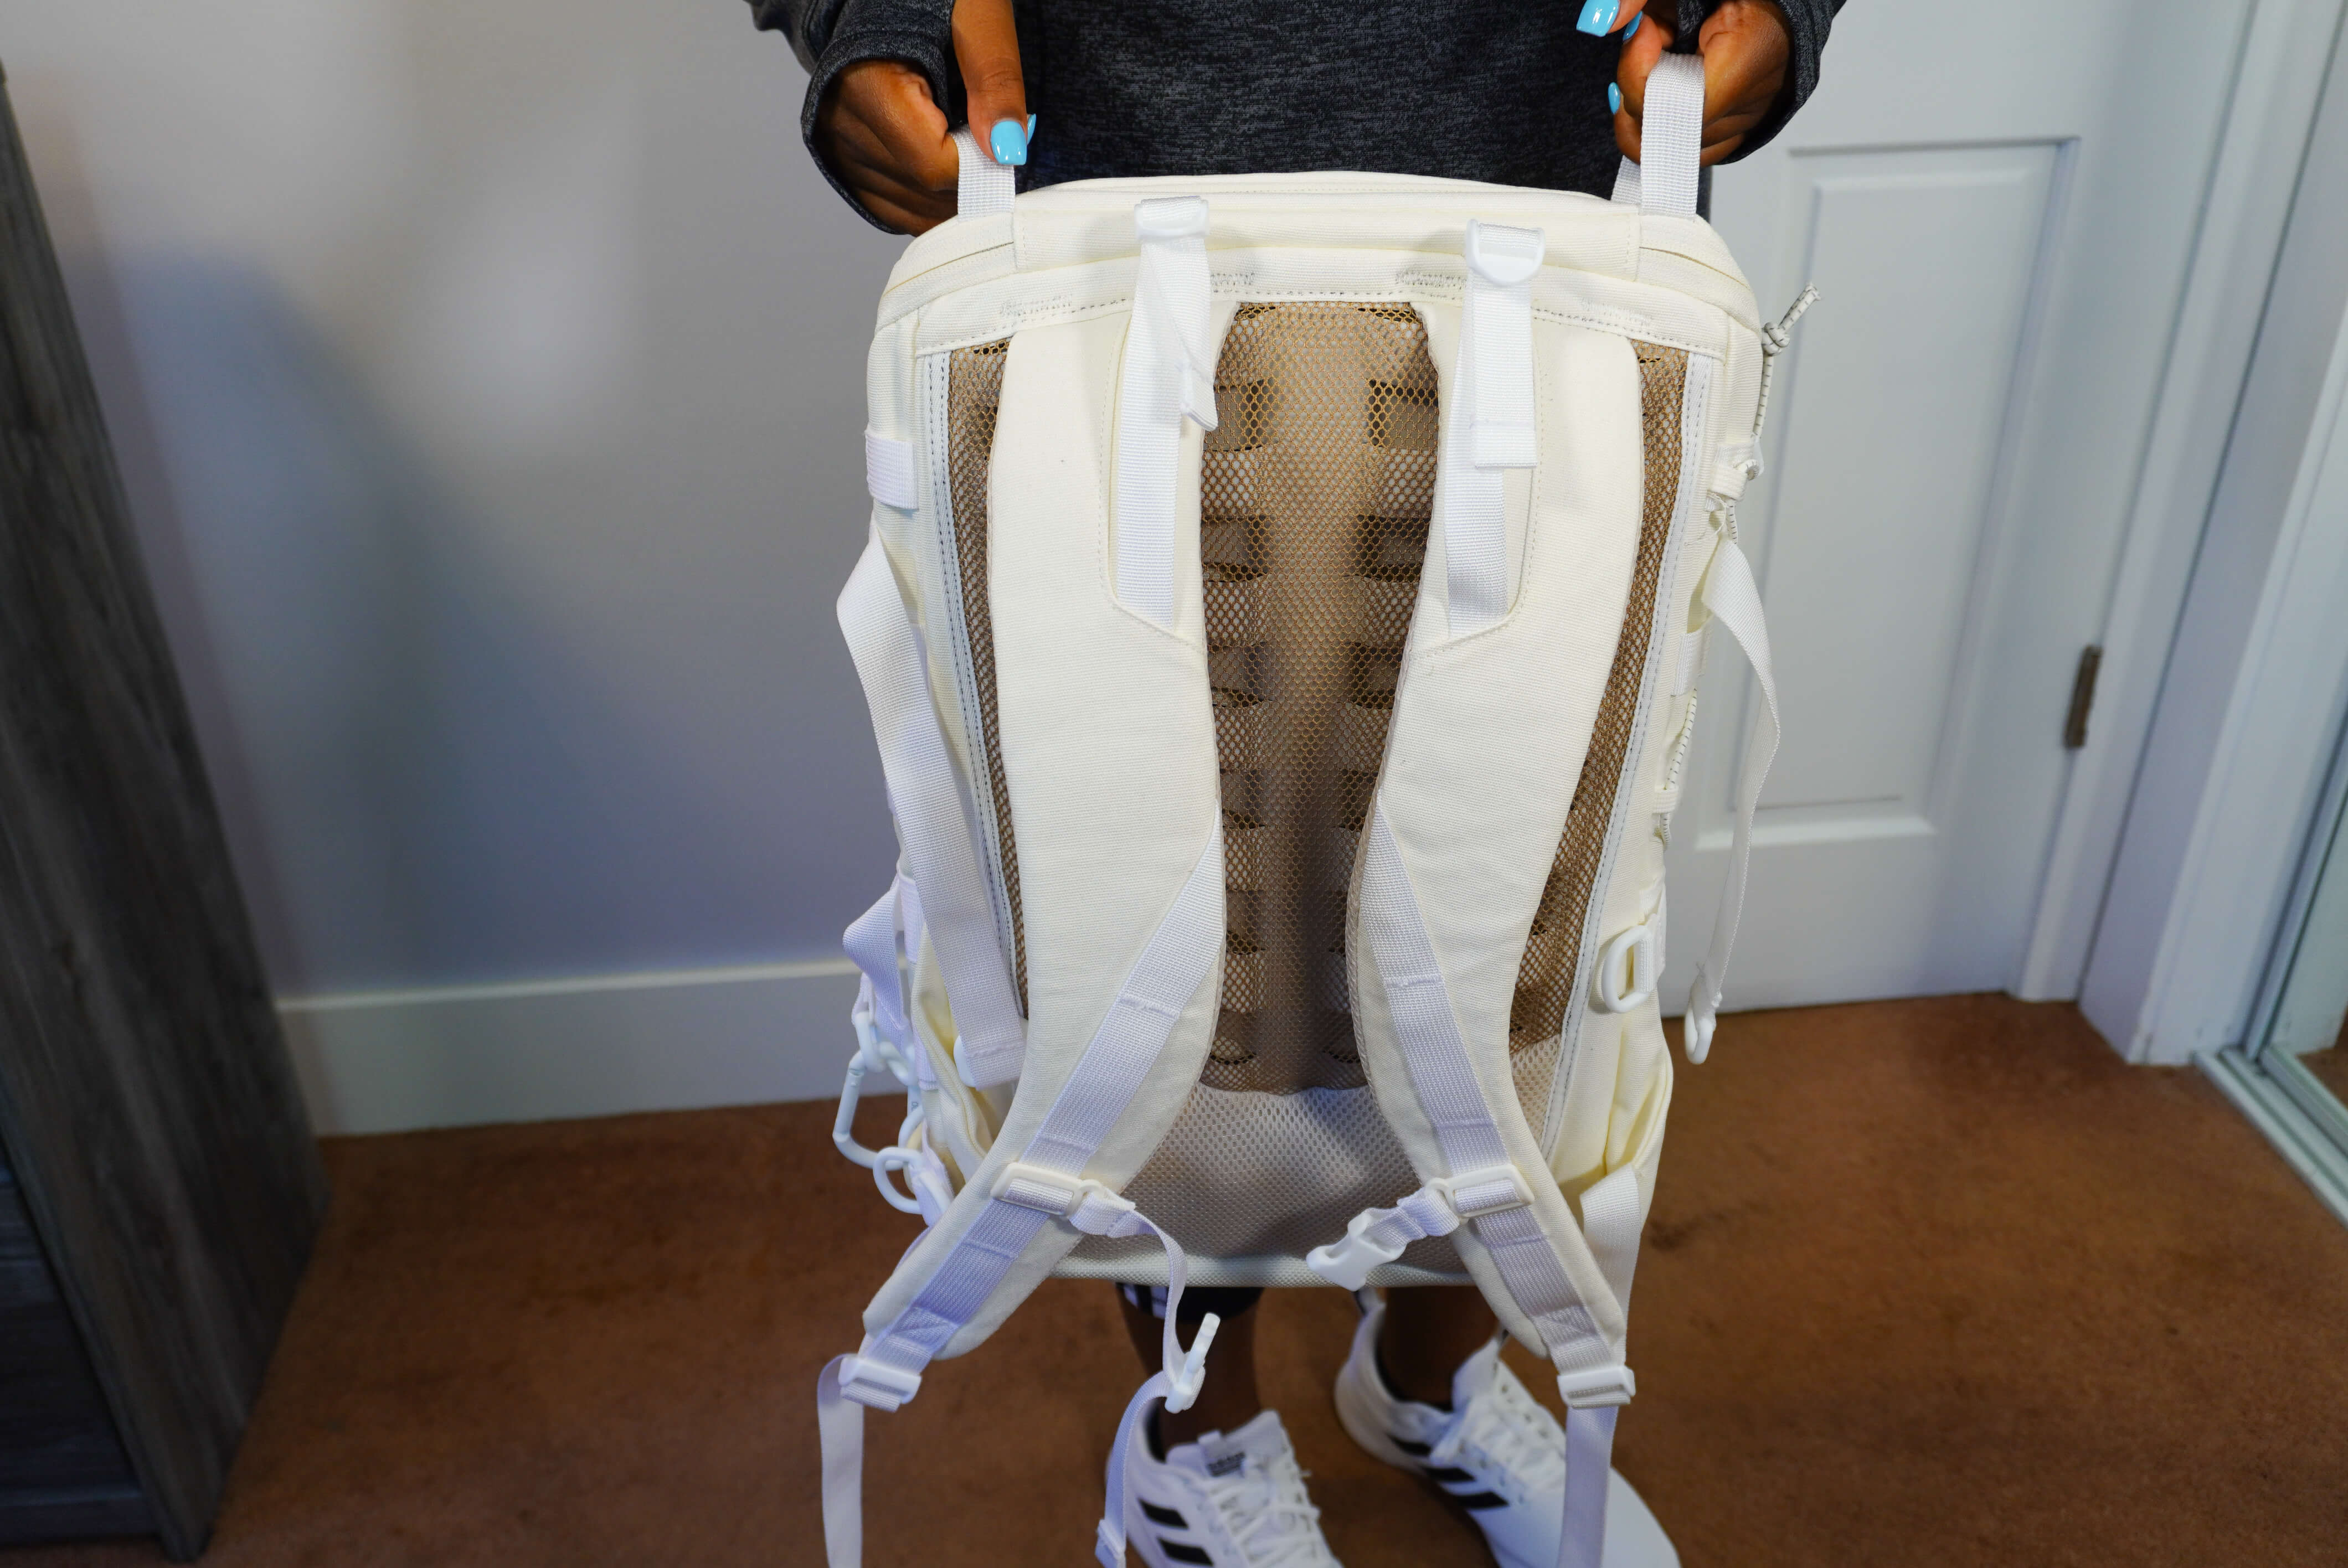 Image of me holding the backpack to show the shoulder straps and mesh netting on the back.